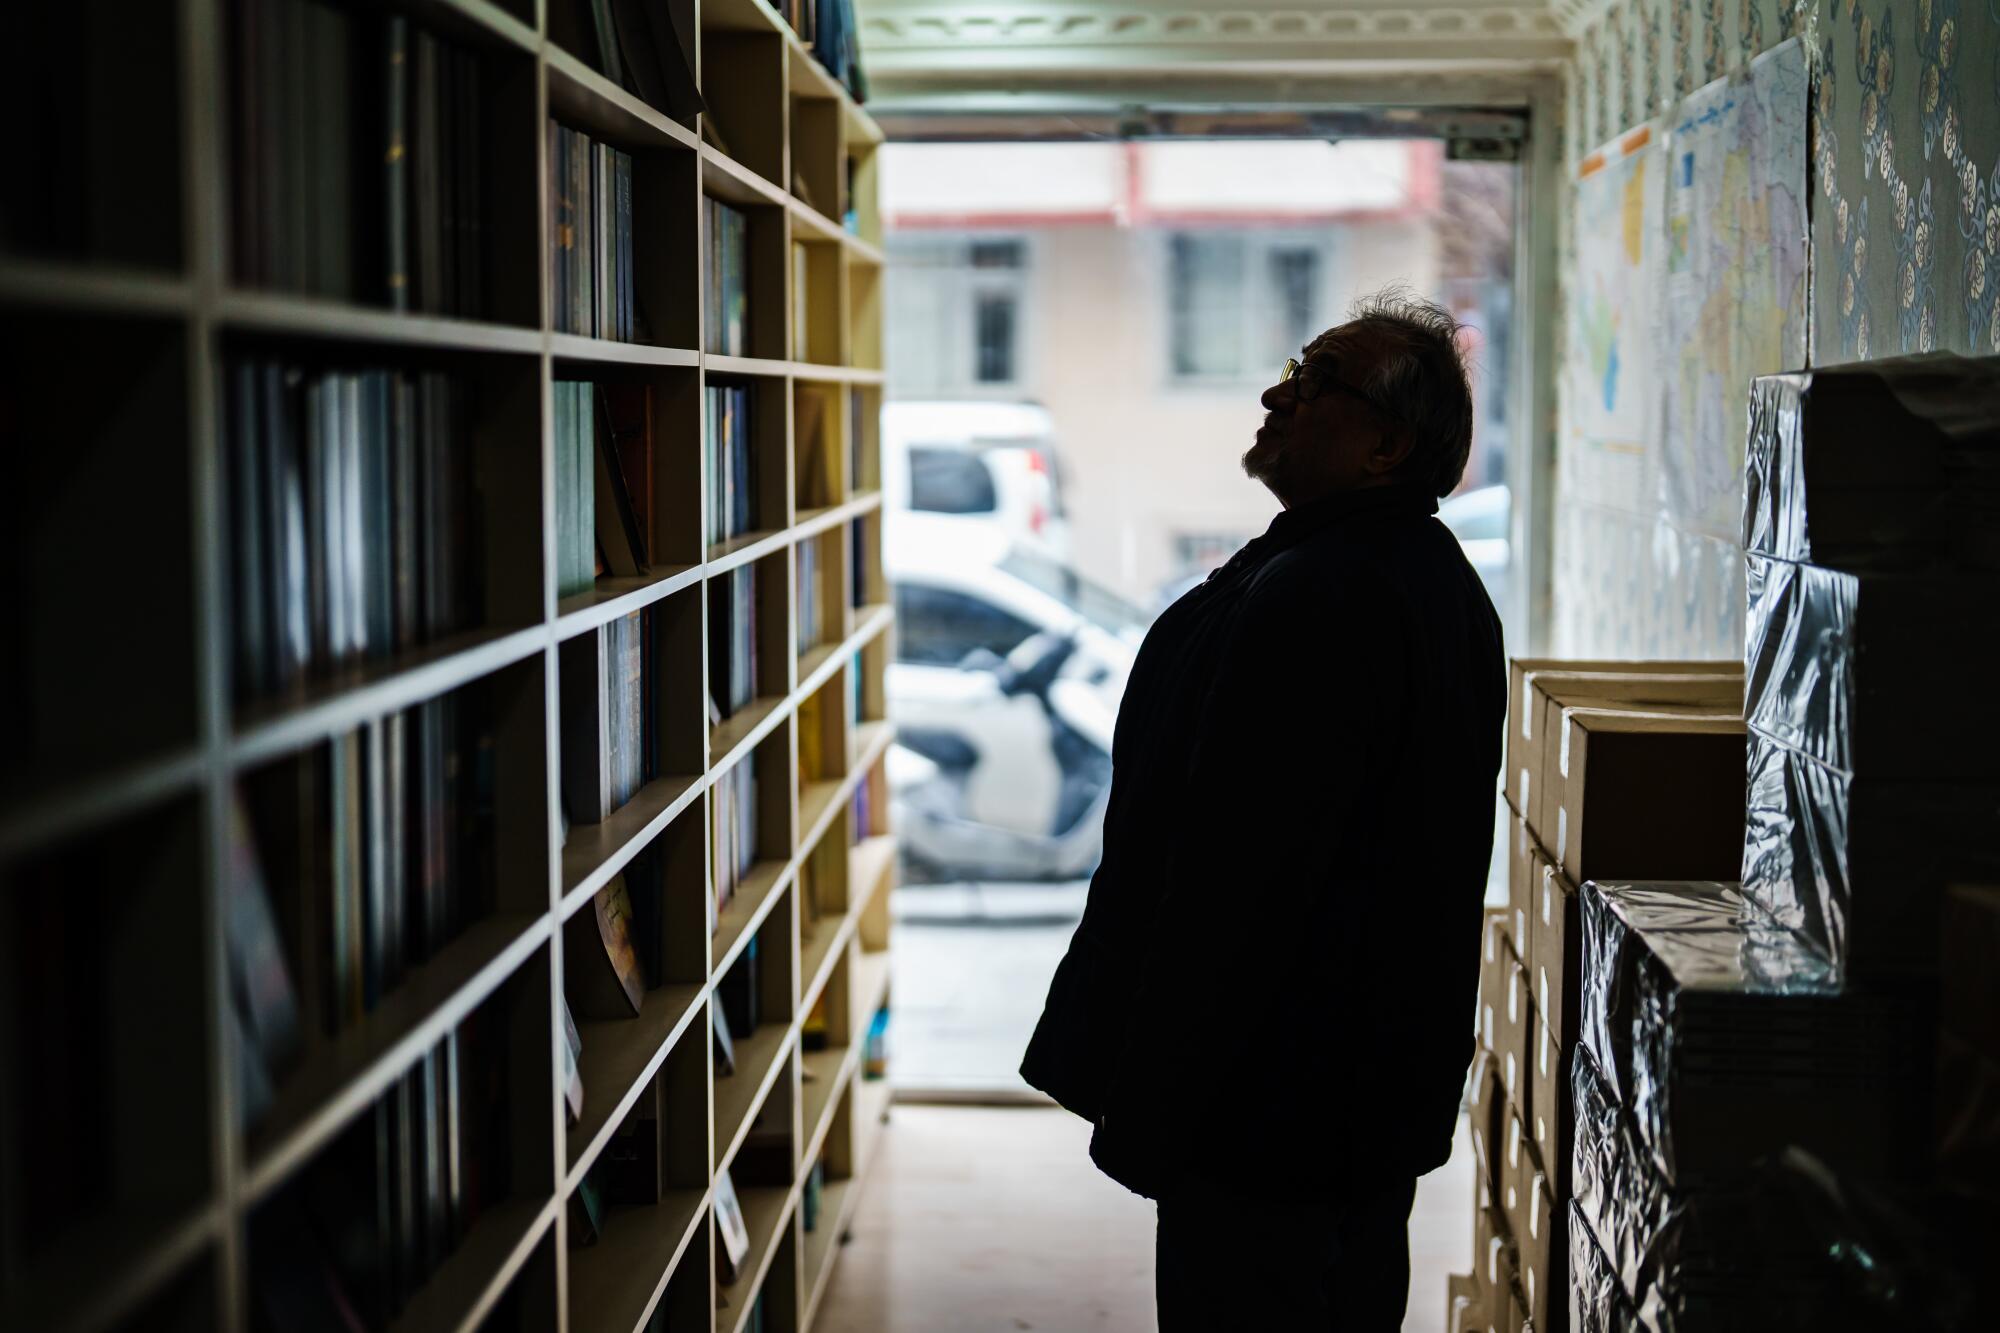 A man shown in silhouette looks up at books on shelves 